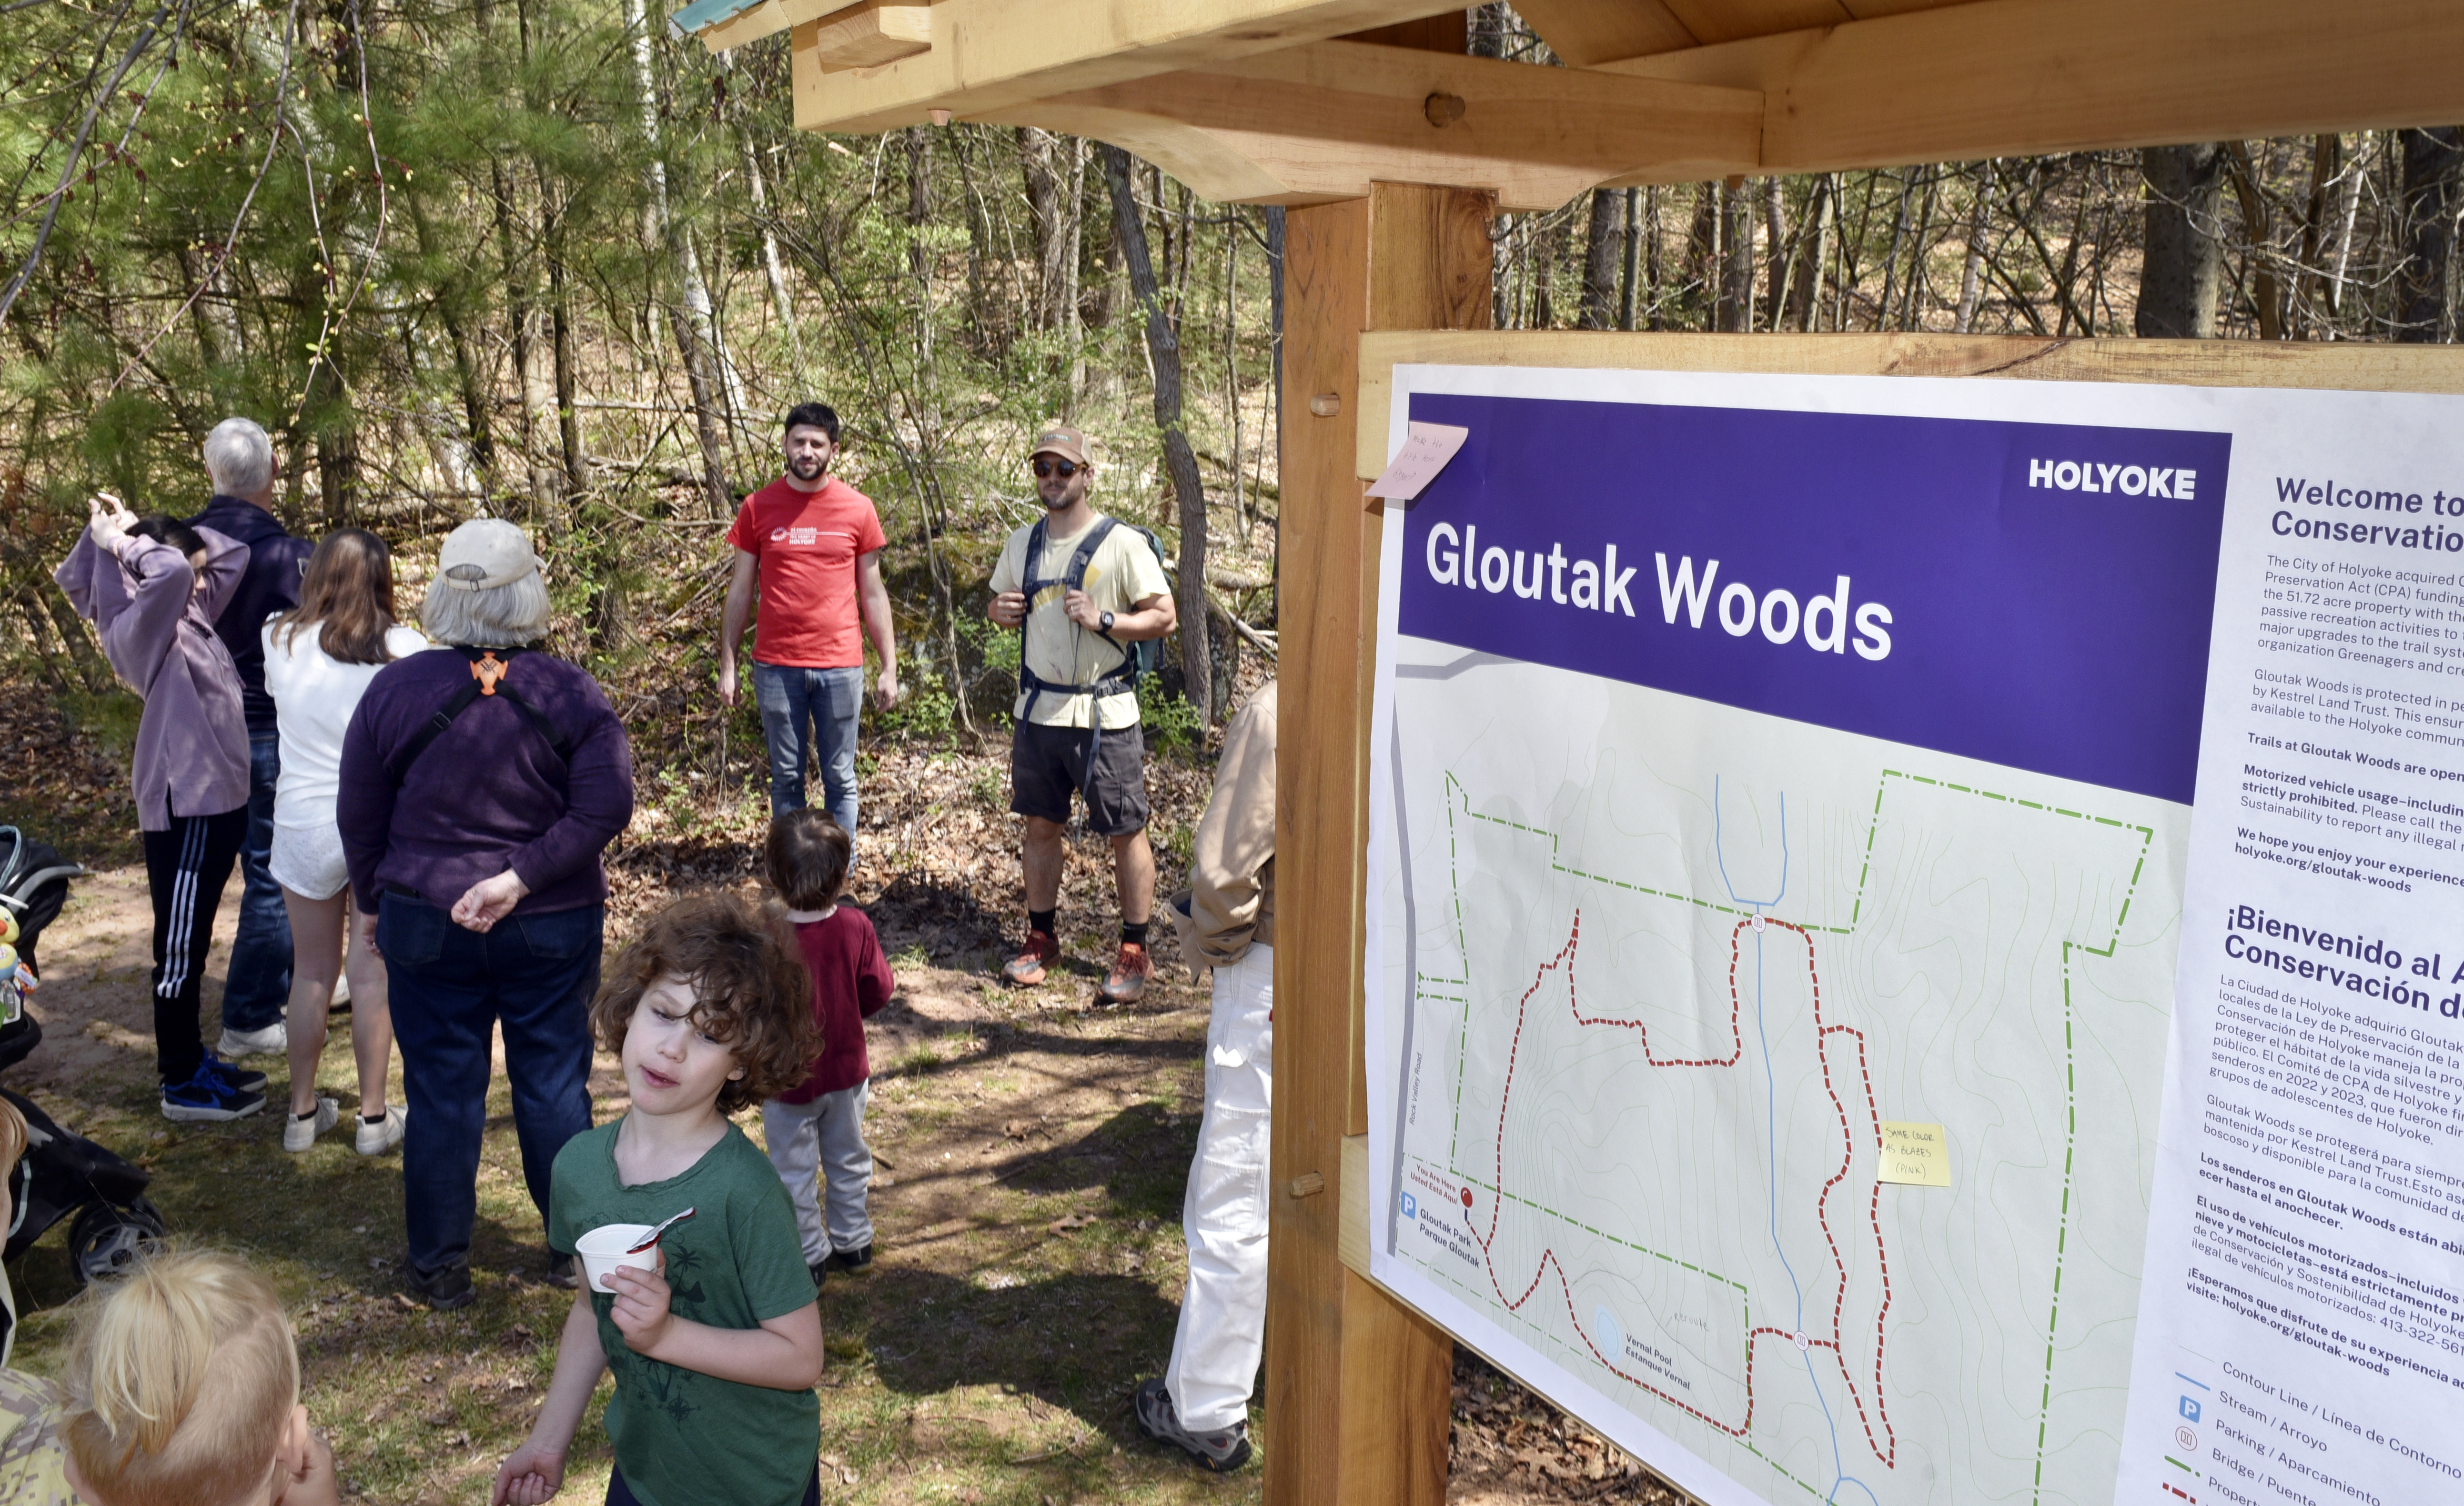 Yoni Glogower, Holyoke's Director of Conservation and Sustainability (orange shirt), gets ready to lead a hike along the recently renovated Gloutak Woods Trail.  (Don Treeger / The Republican)  4/21/2023